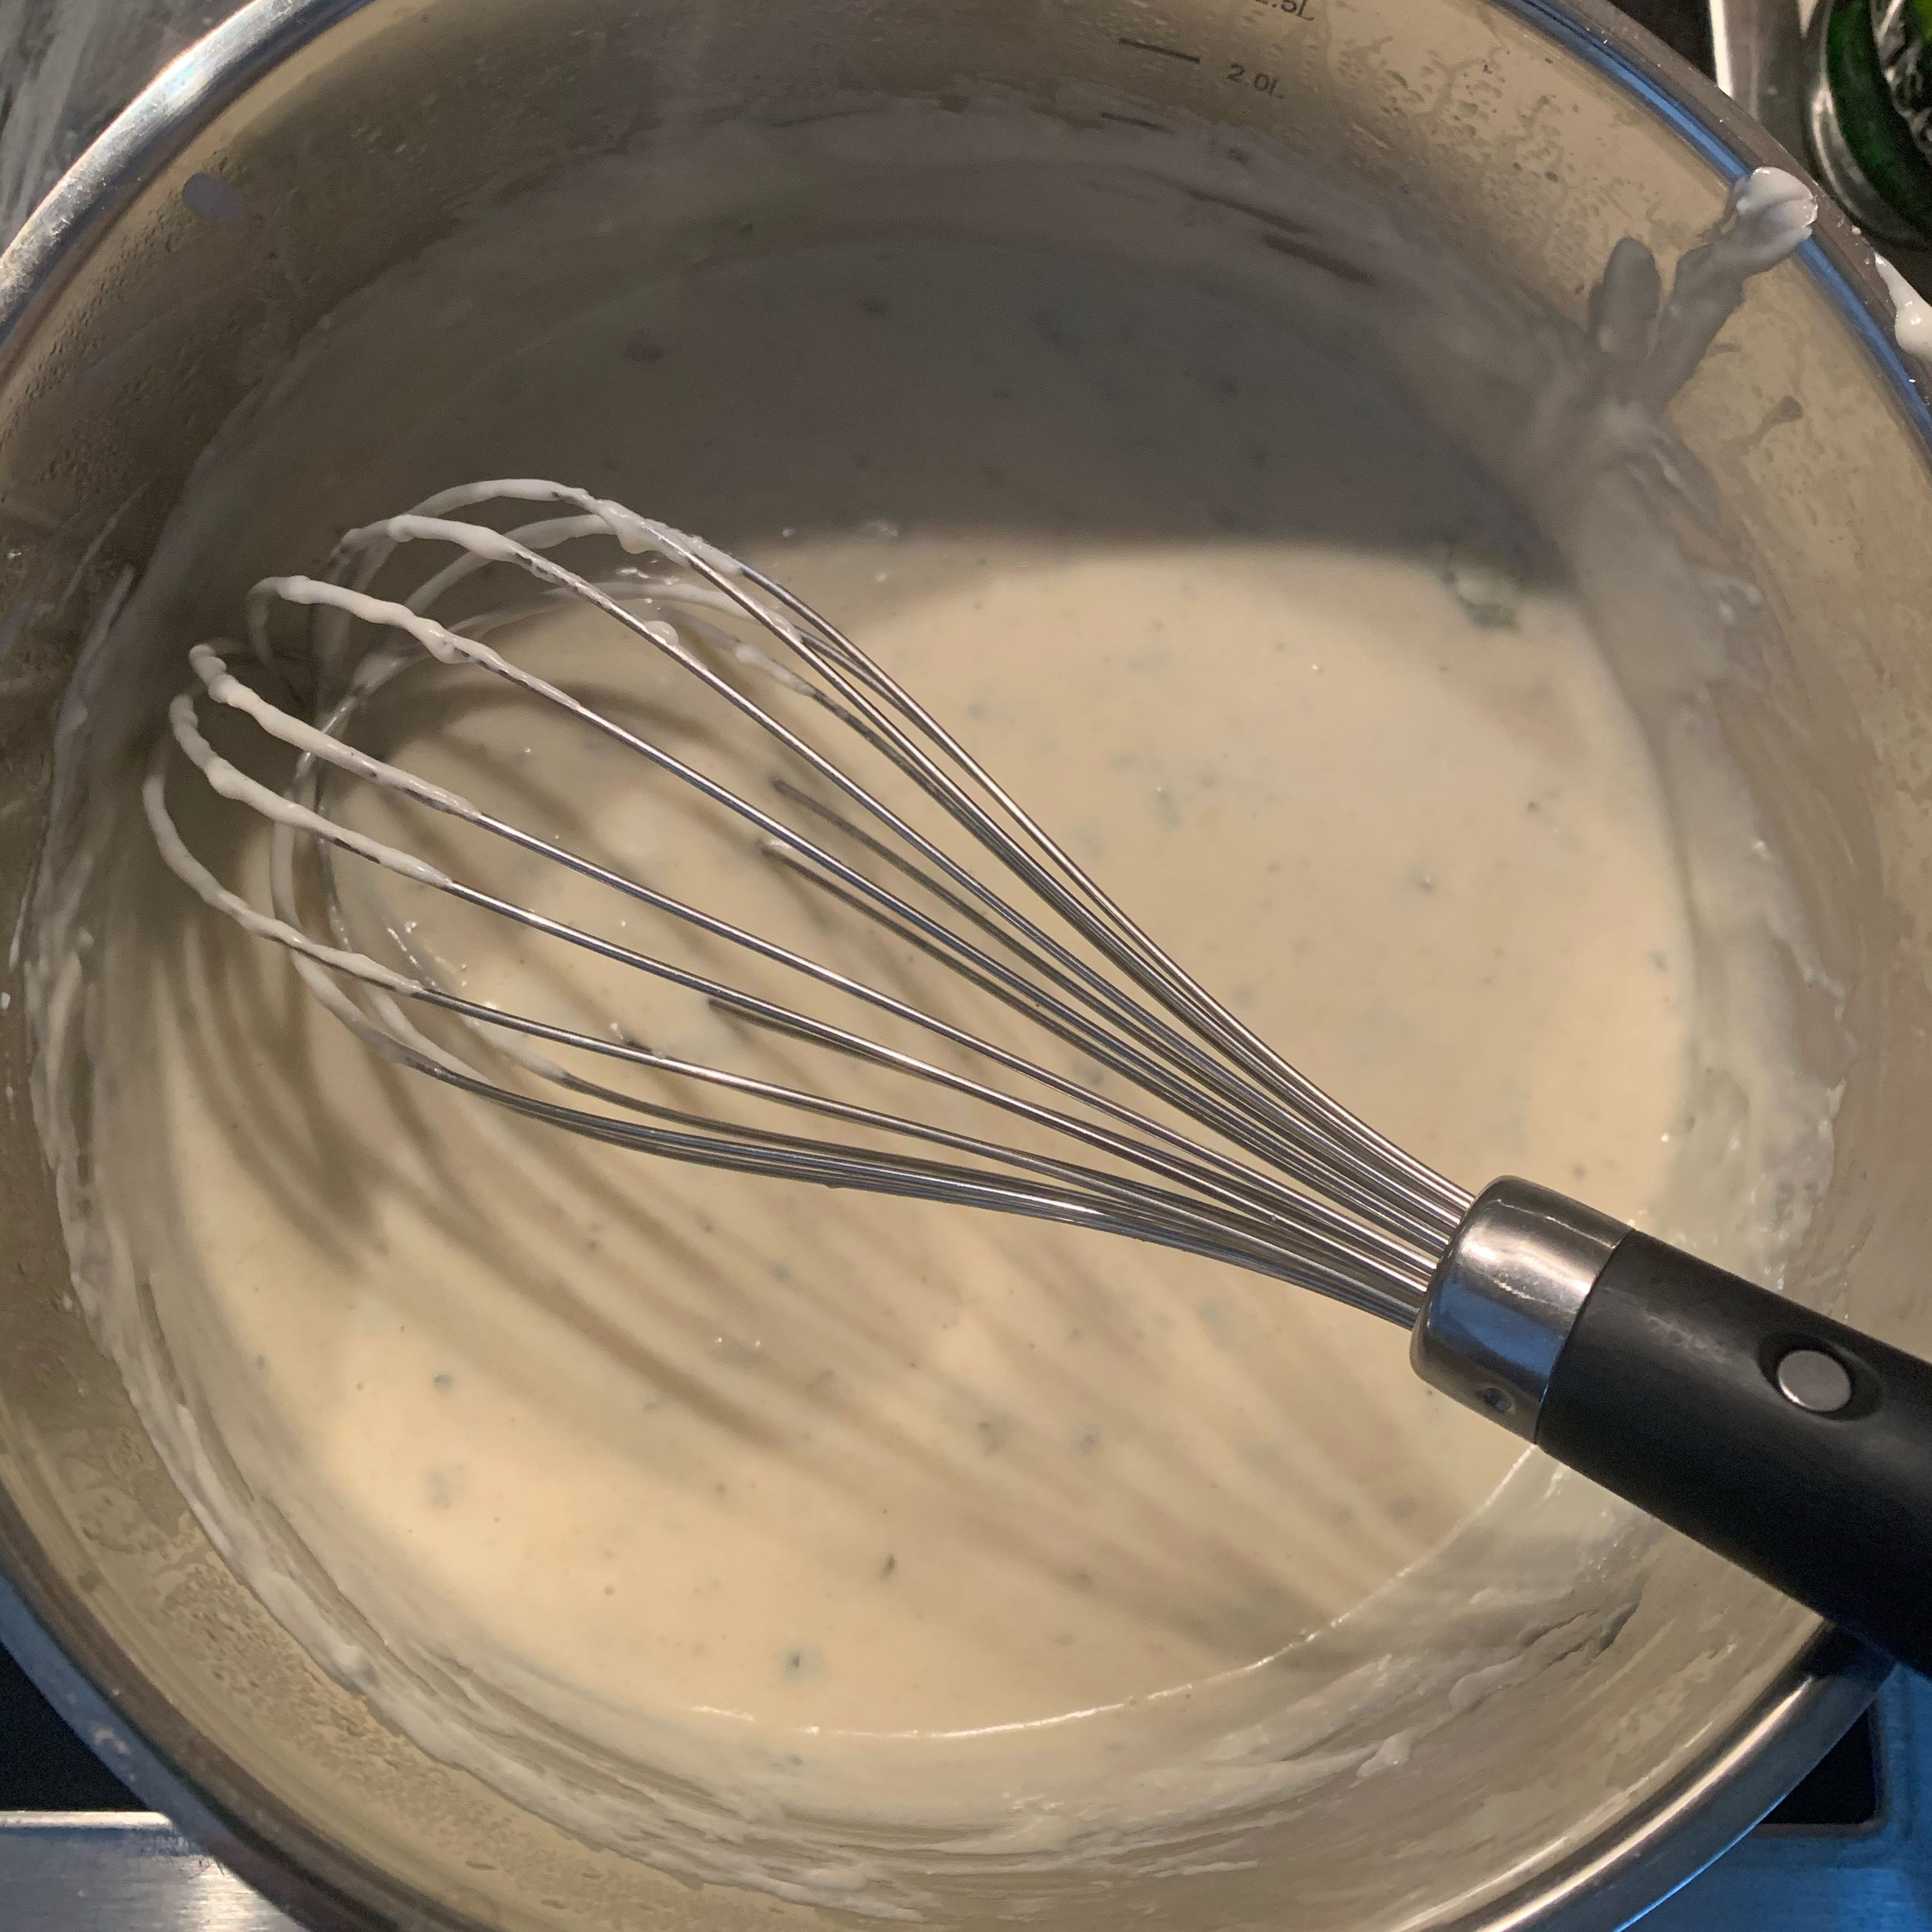 Remove béchamel sauce from fire. Cut Gorgonzola cheese into small pieces and add to the béchamel. Mix until obtaining a soft sauce.